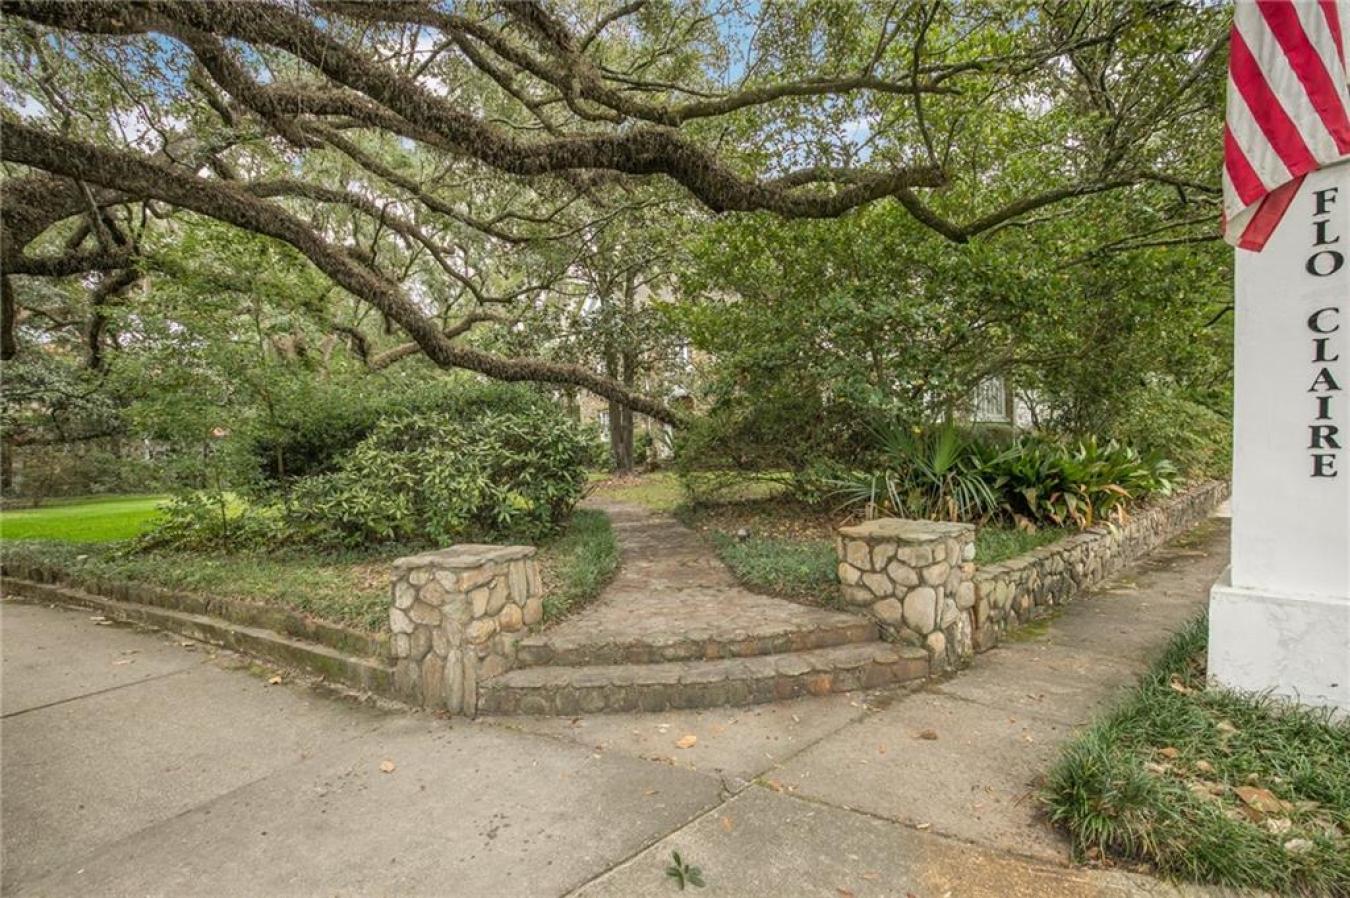 1605 Government Street, Mobile, Alabama, 36604, United States, 4 Bedrooms Bedrooms, ,3 BathroomsBathrooms,Residential,For Sale,1605 Government Street,1395551